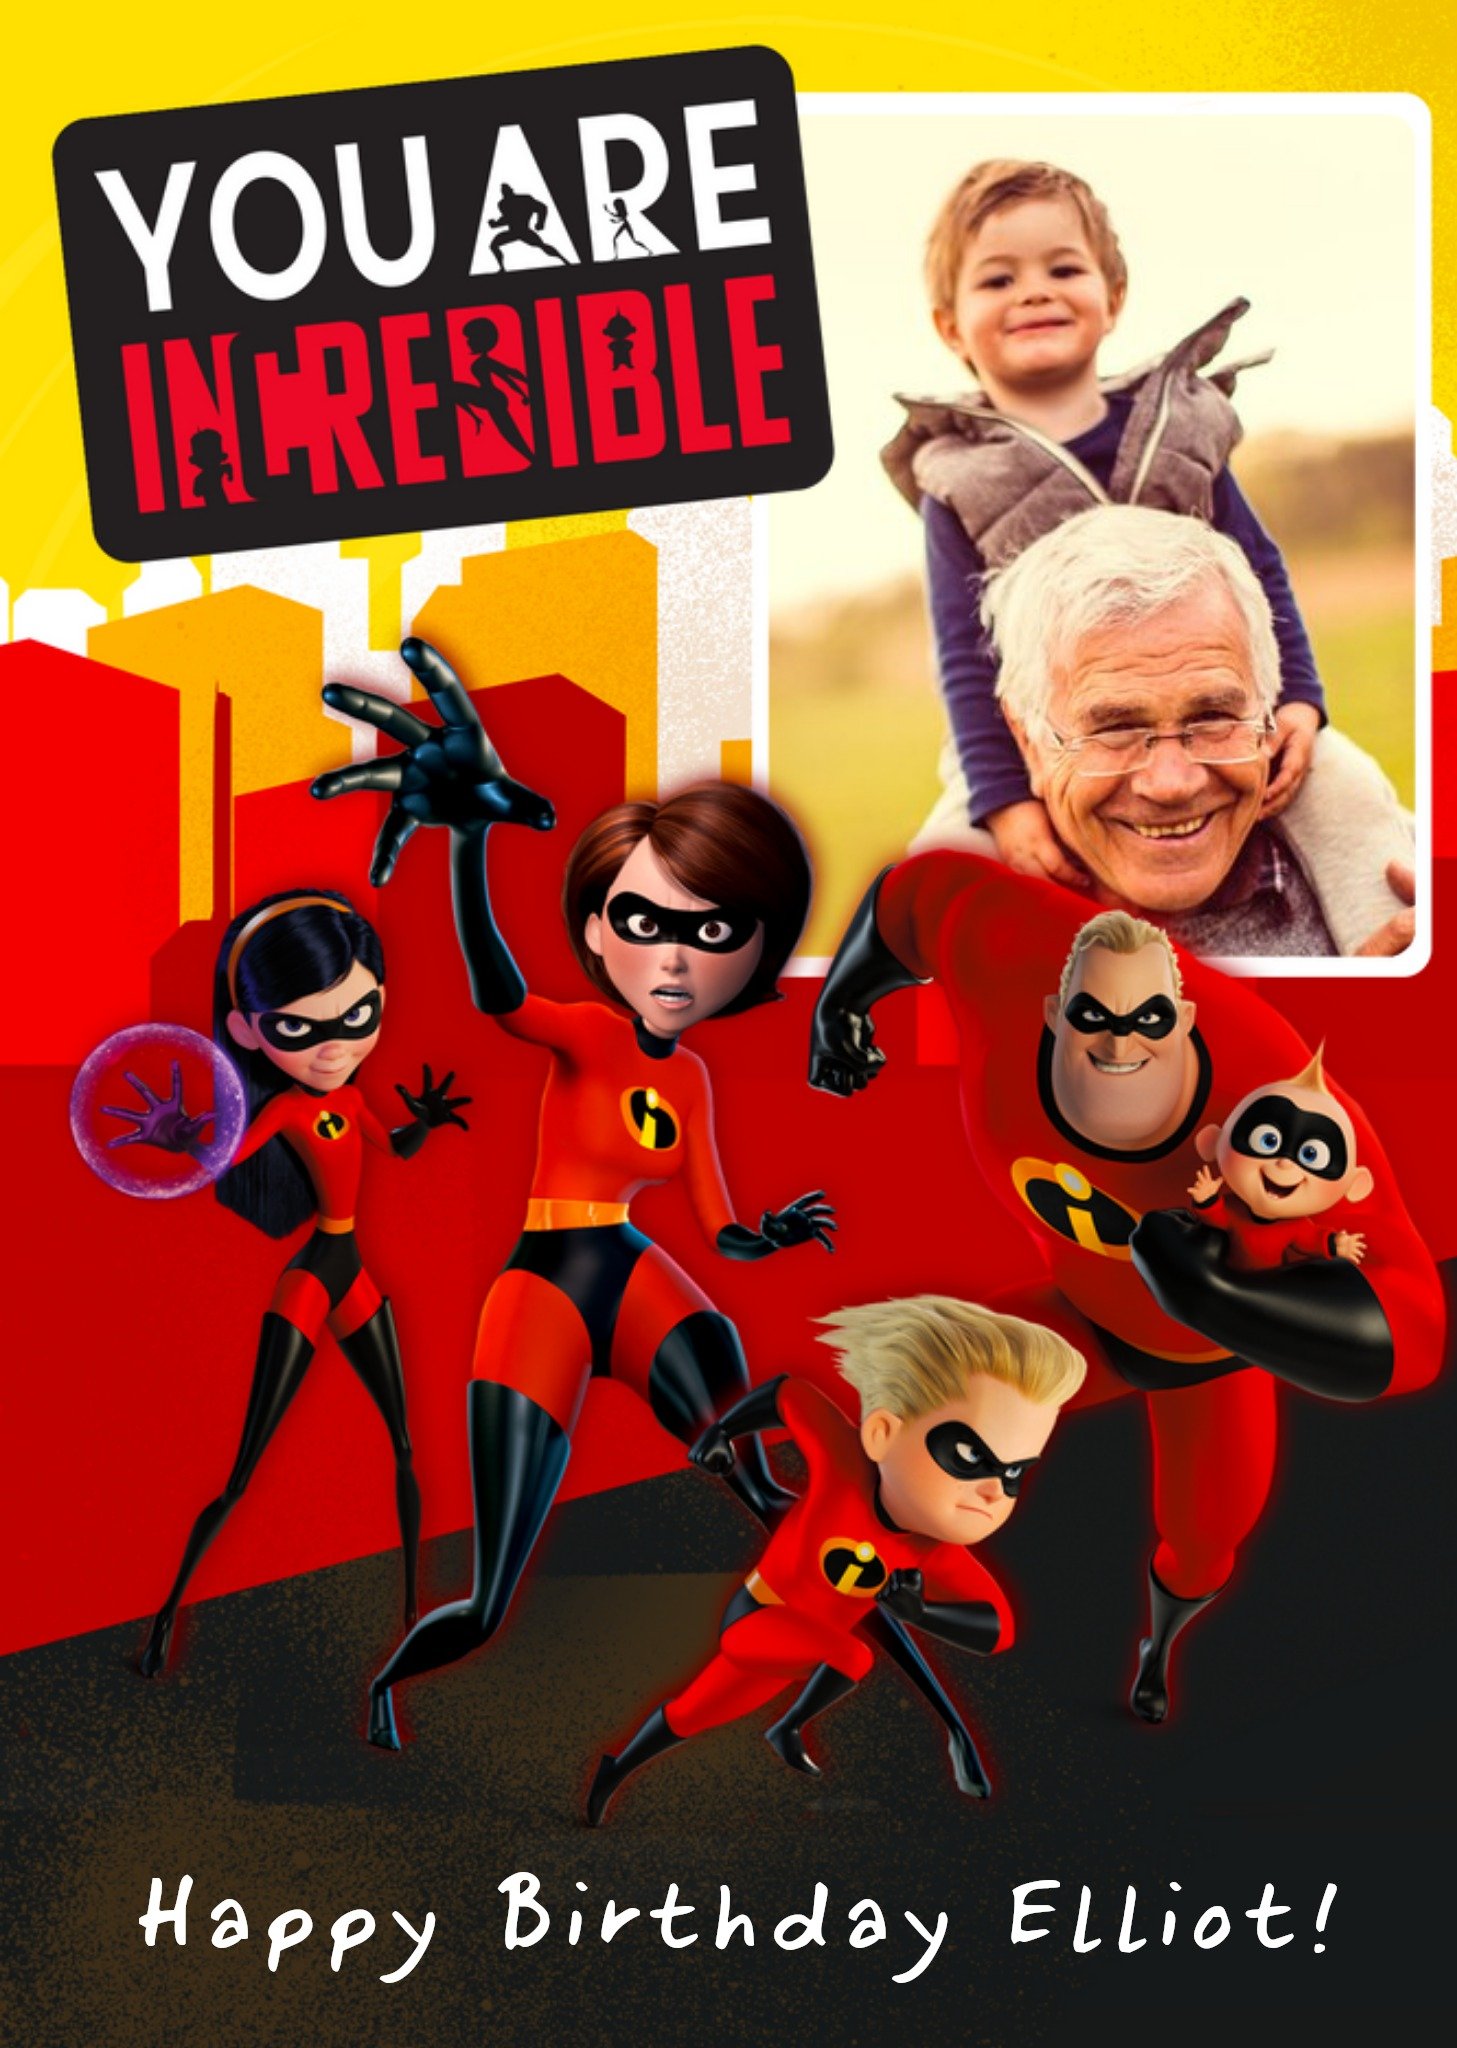 Other Birthday Card - The Incredibles 2 - Disney Pixar - Photo Upload Card, Large